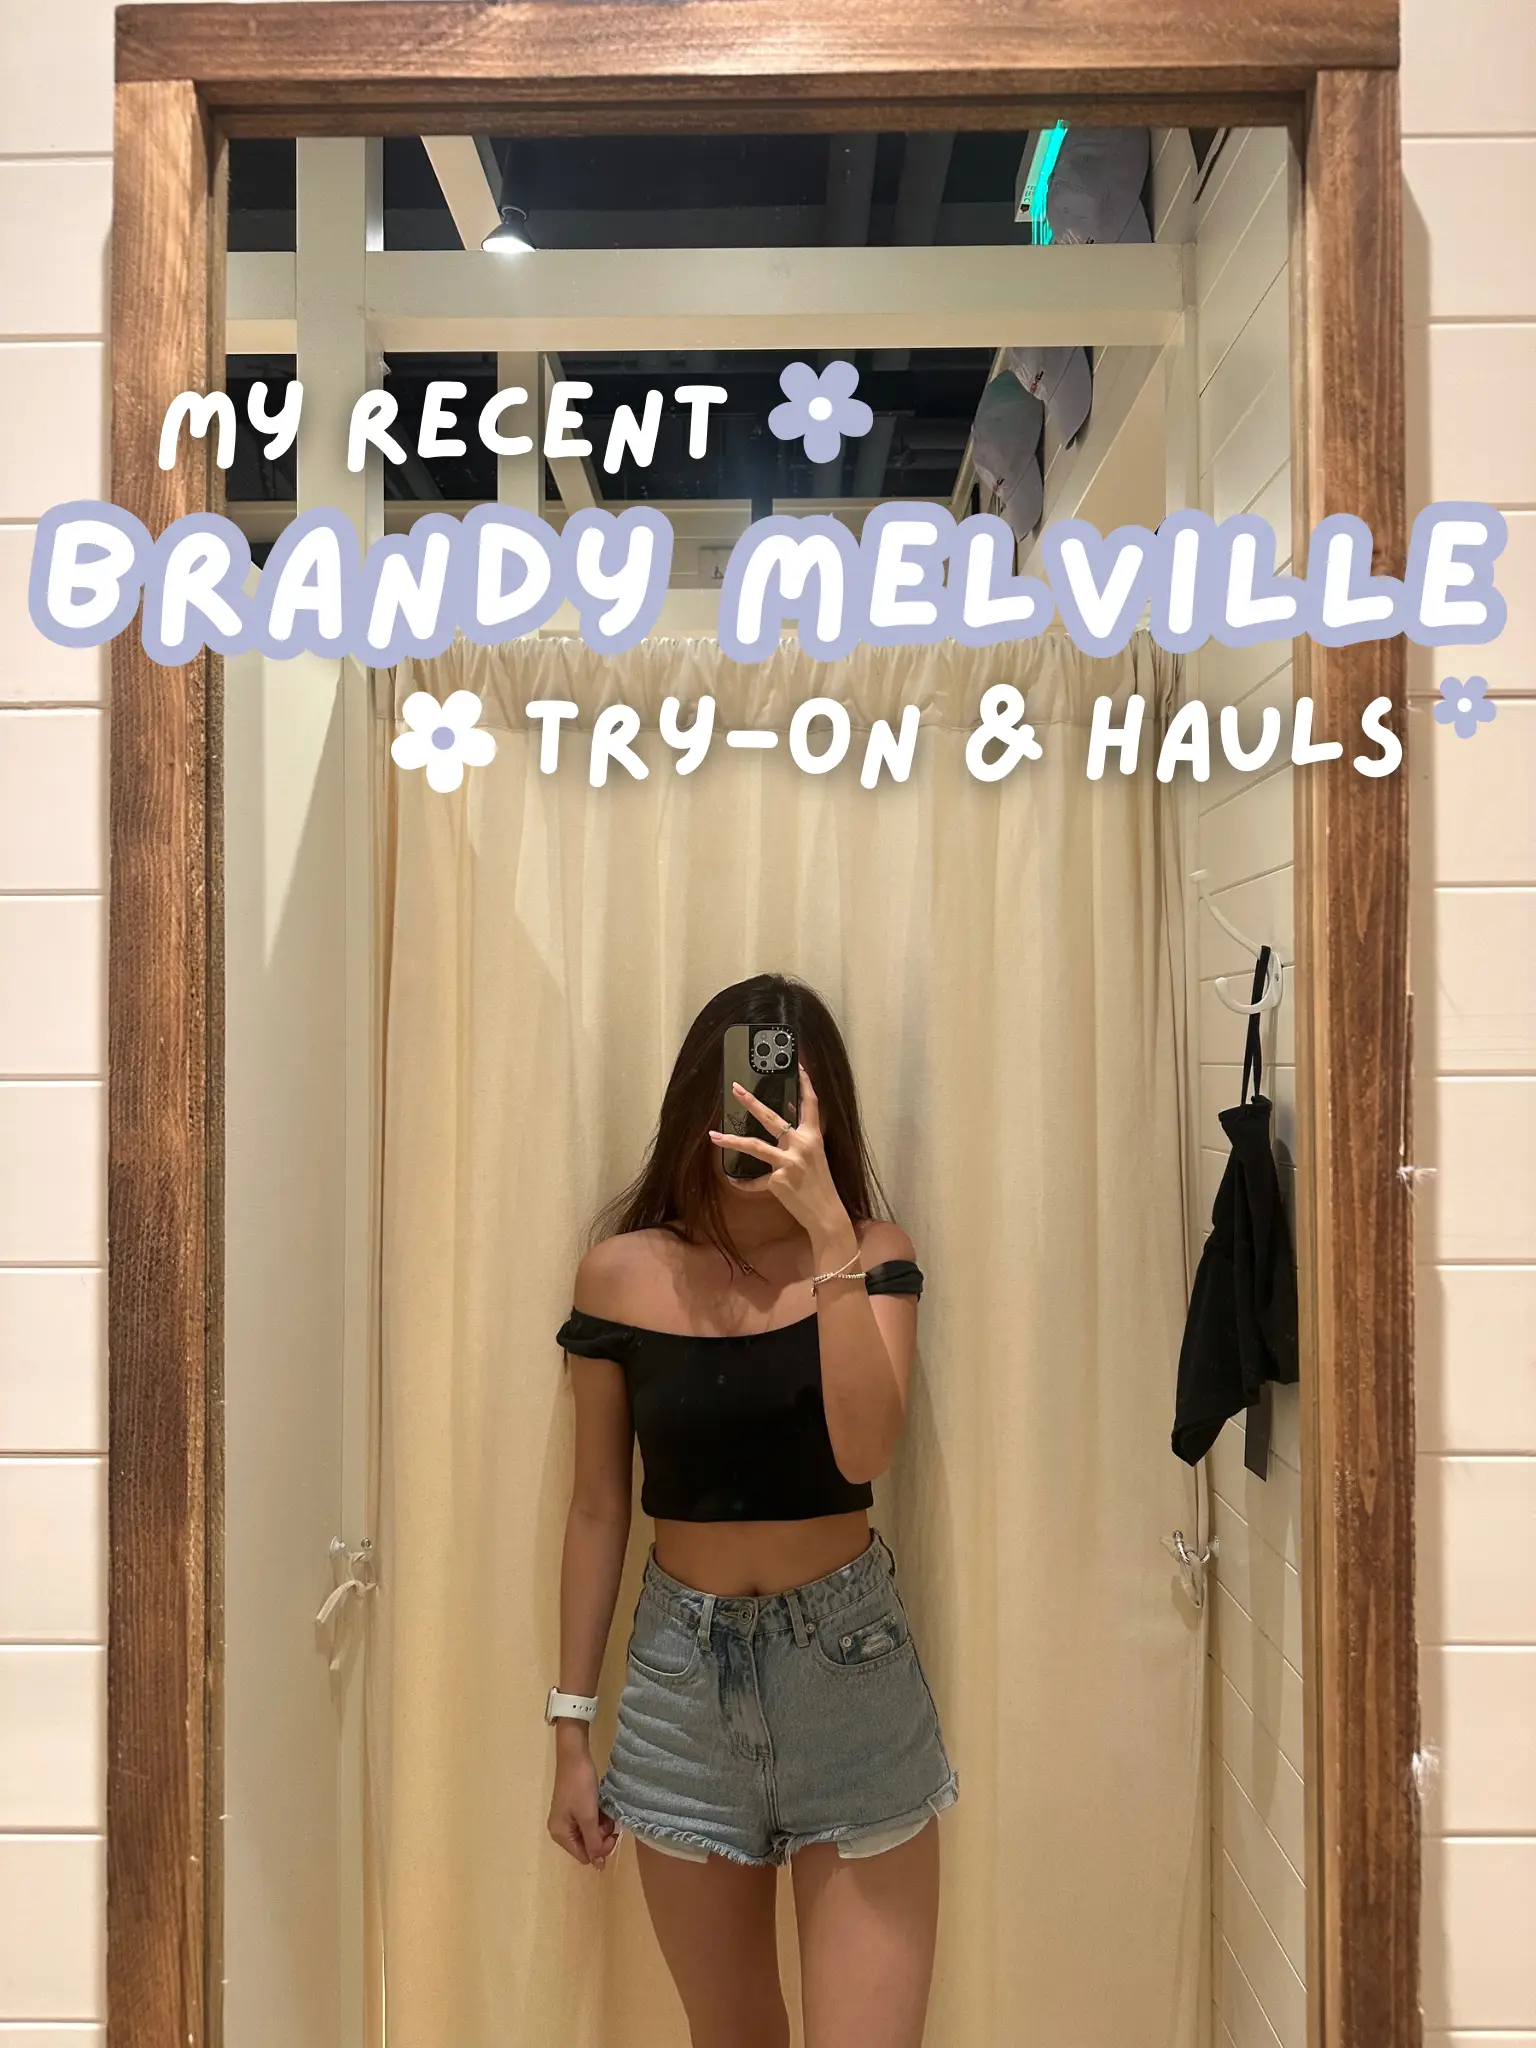 BRANDY MELVILLE NOW SHIPS TO SG & my try-ons🤭